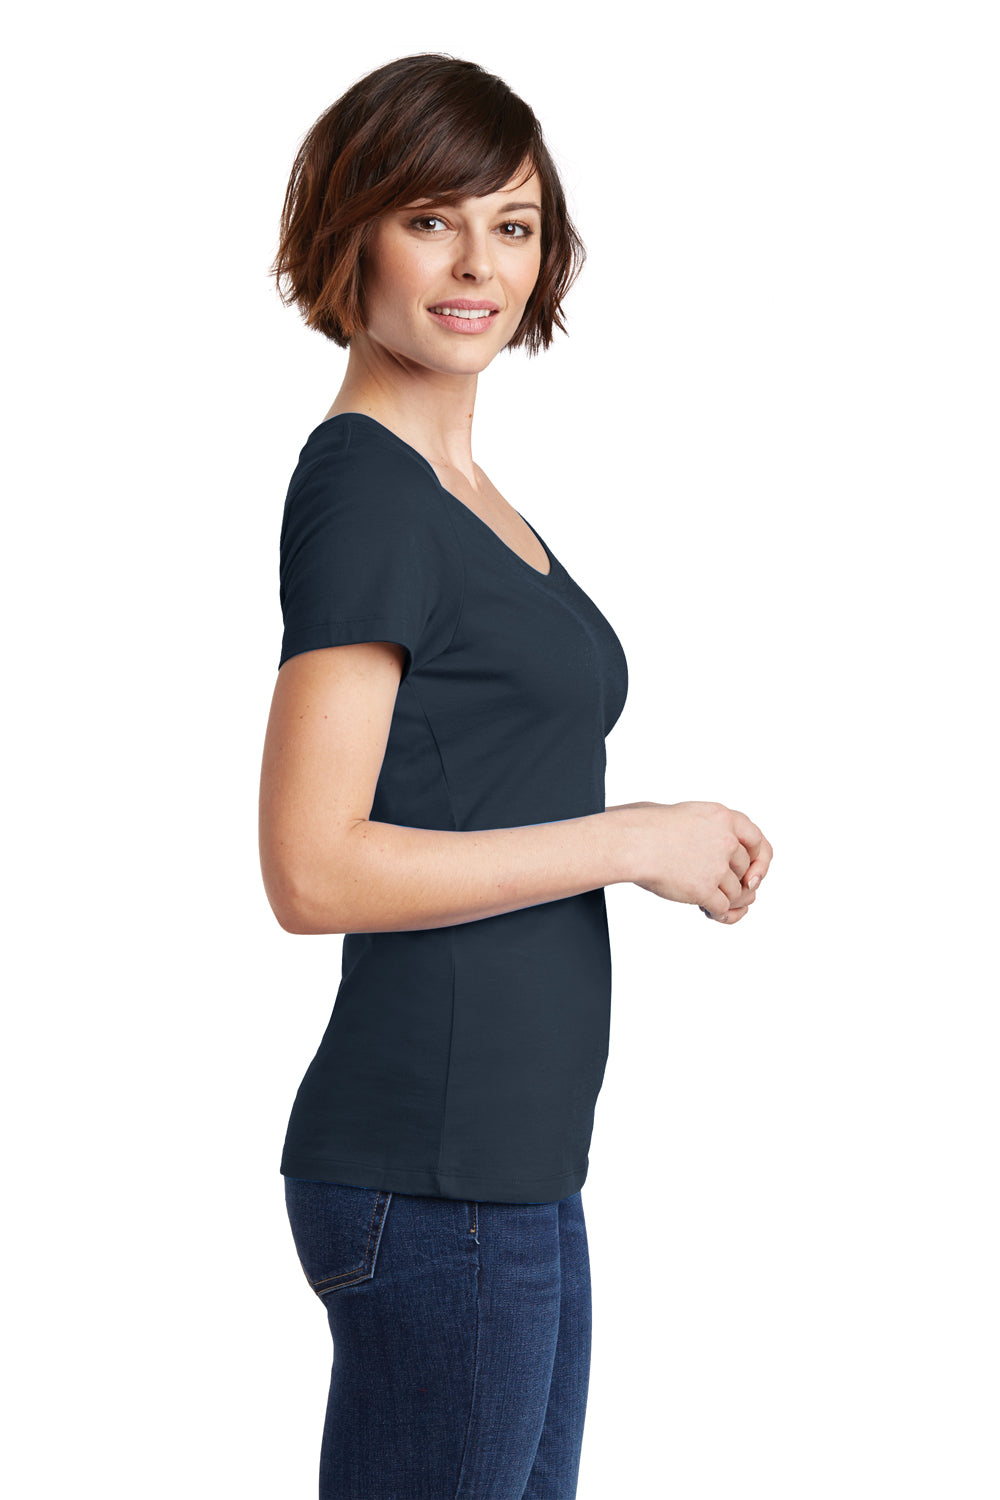 District DM106L Womens Perfect Weight Short Sleeve Scoop Neck T-Shirt Navy Blue Side